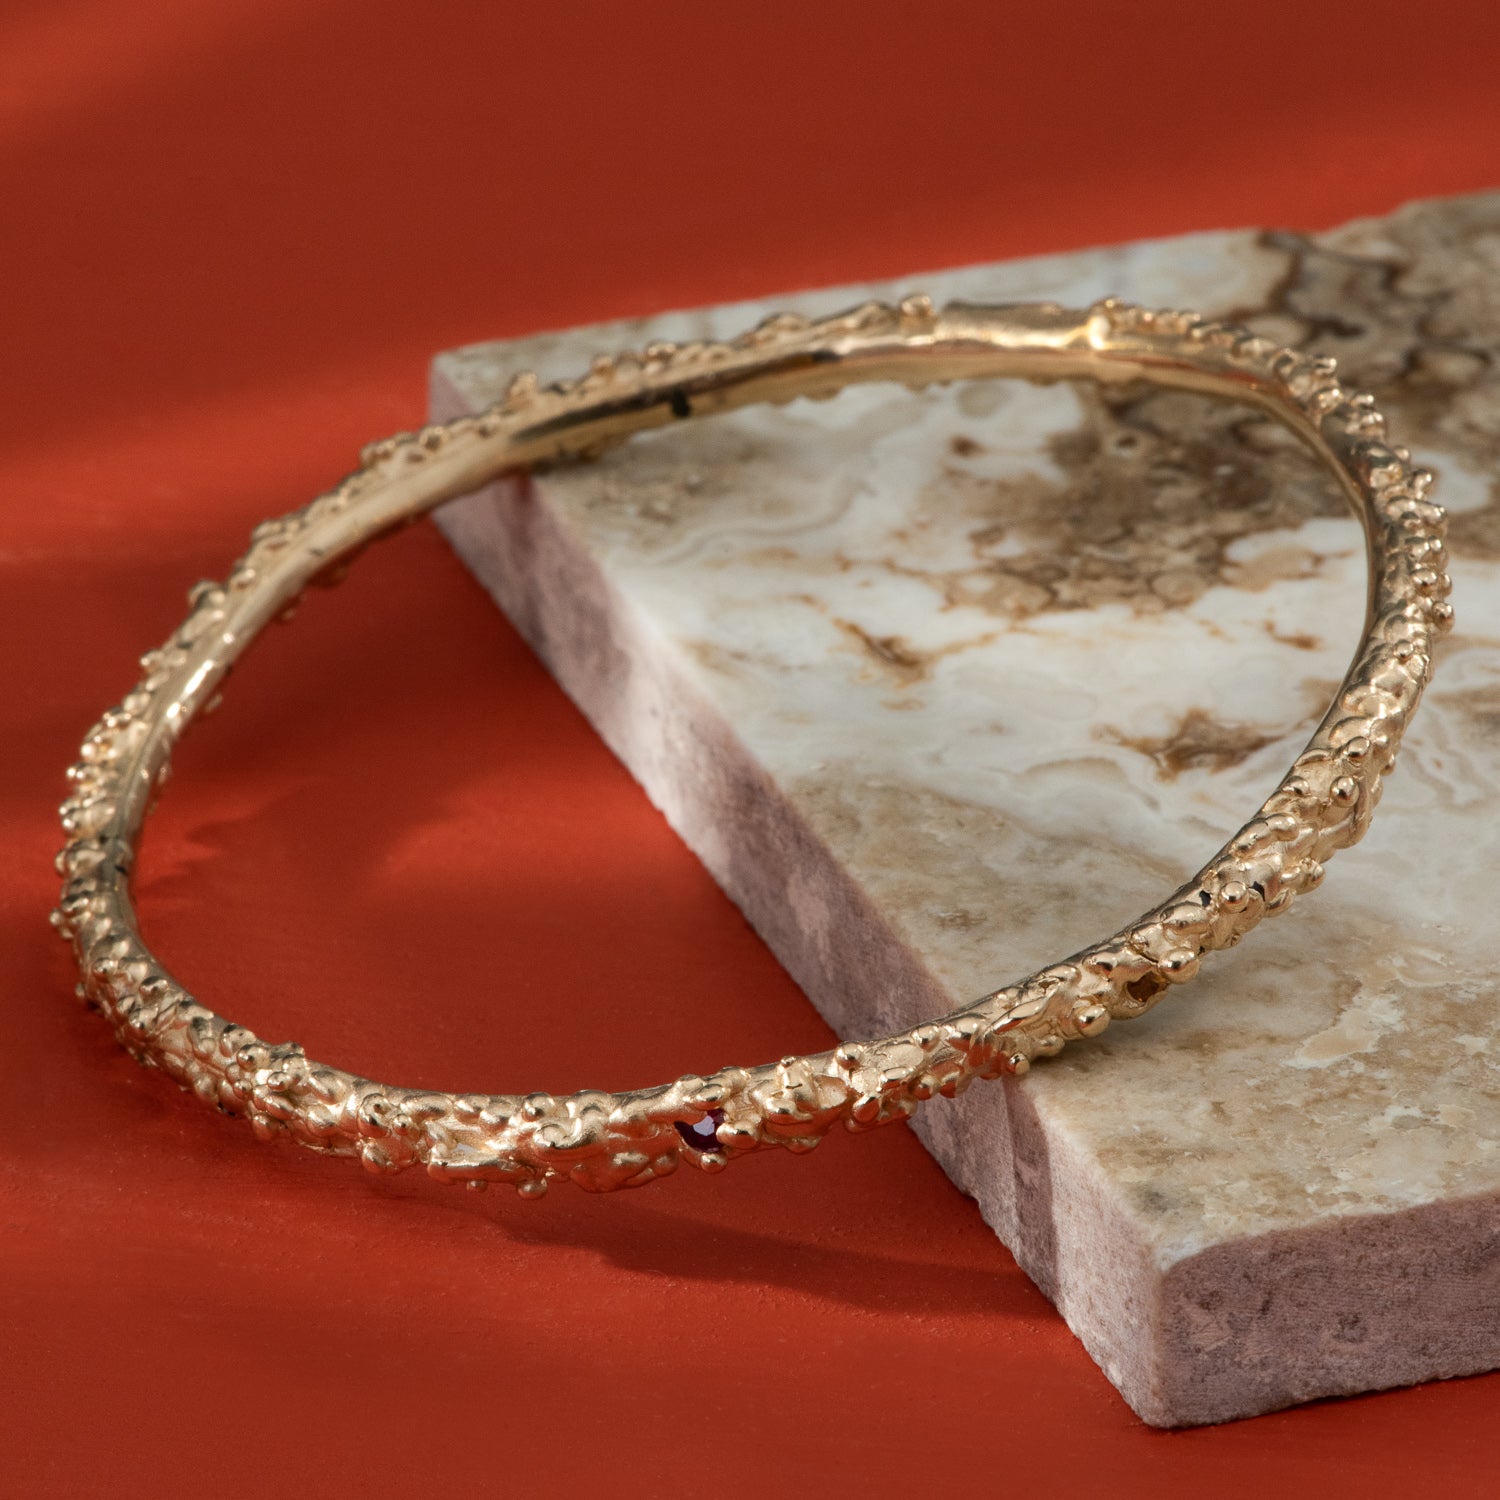 Small bubbles of yellow gold flow all the way around a polished bangle.